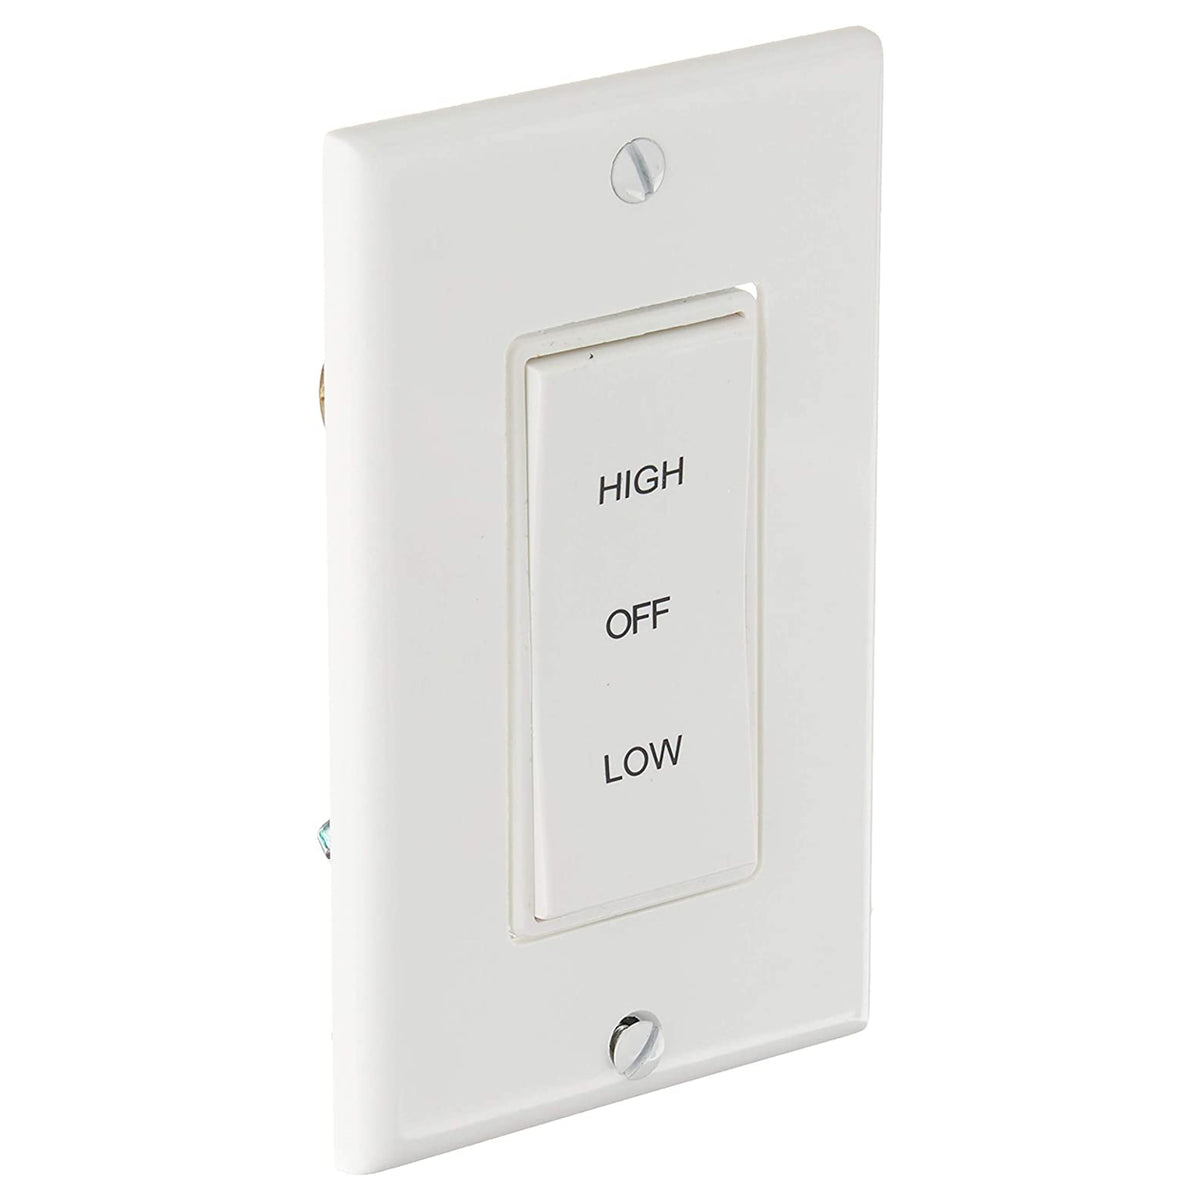 Air Vent 58030 Rocker Wall Switch, 2 Speed, White